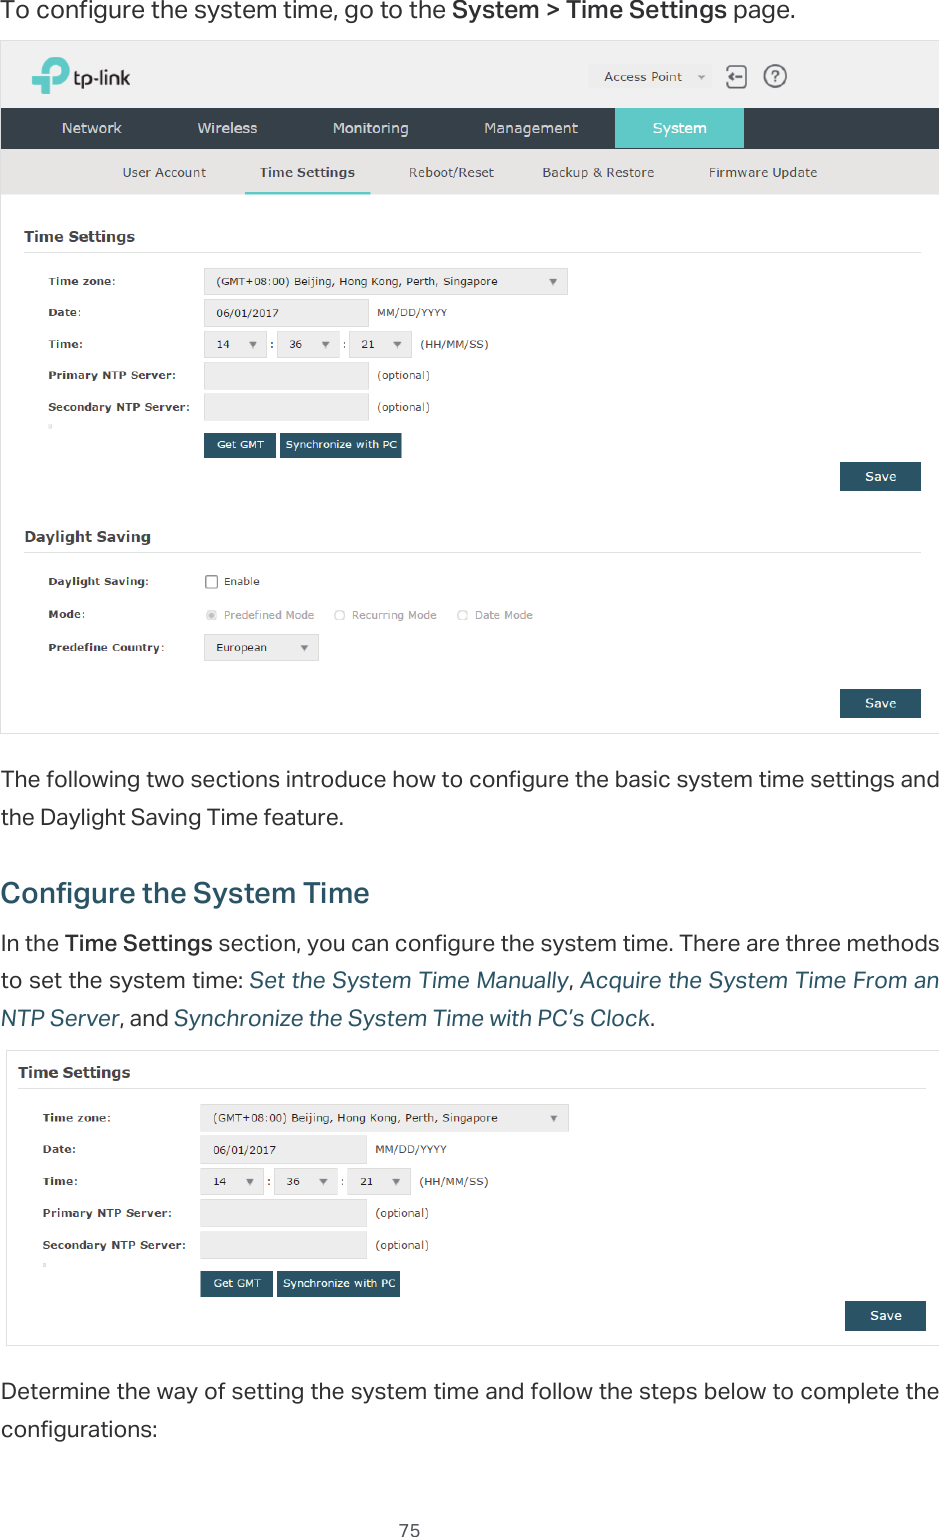  75To configure the system time, go to the System &gt; Time Settings page.The following two sections introduce how to configure the basic system time settings and the Daylight Saving Time feature.Configure the System TimeIn the Time Settings section, you can configure the system time. There are three methods to set the system time: Set the System Time Manually, Acquire the System Time From an NTP Server, and Synchronize the System Time with PC’s Clock.Determine the way of setting the system time and follow the steps below to complete the configurations: